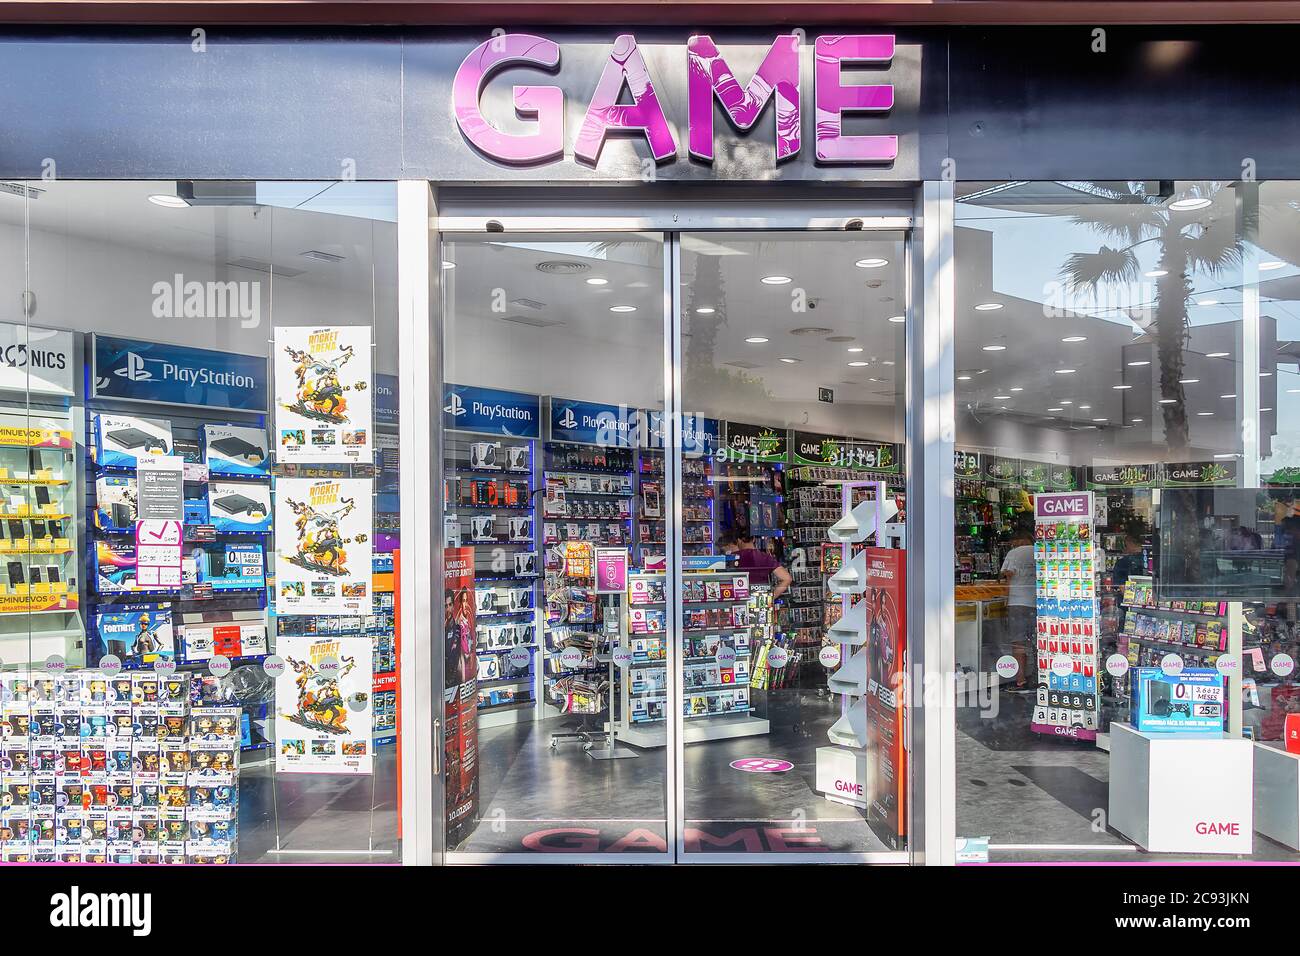 Huelva, Spain - July 27, 2020: Game store in Holea Shopping center. Game is a UK-based video game retailer, previously subsidiary of Game Digital, but Stock Photo